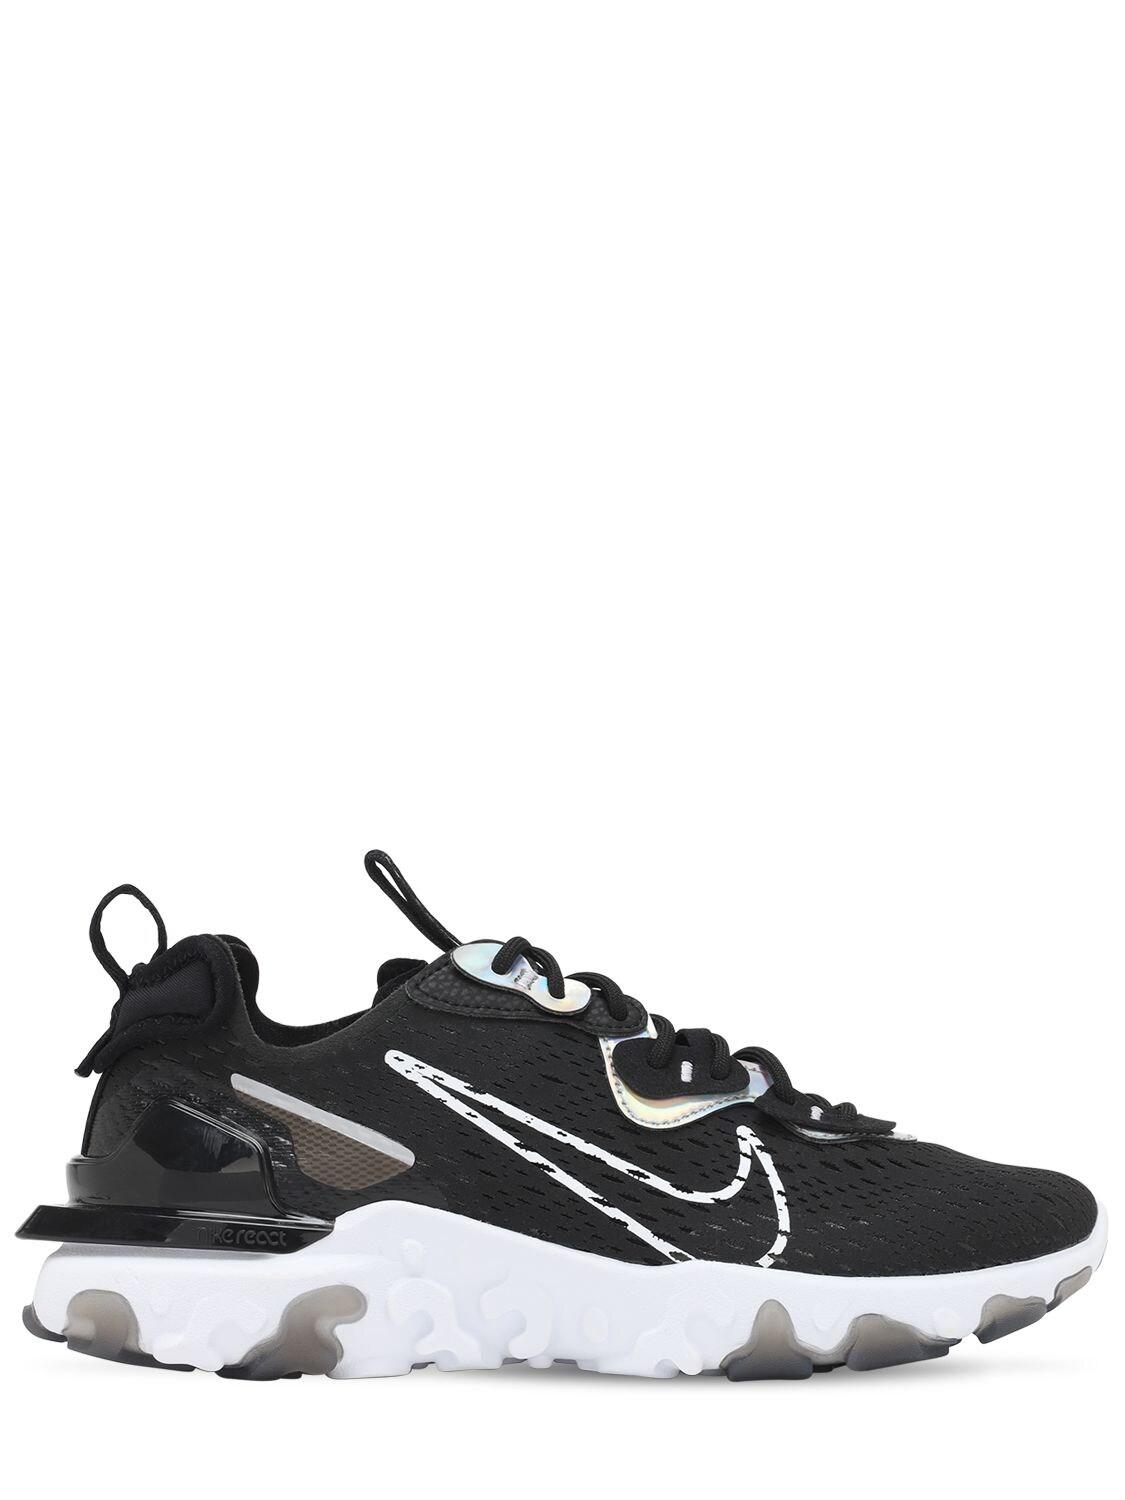 Nike Nsw React Vision Essential Shoe in Black | Lyst